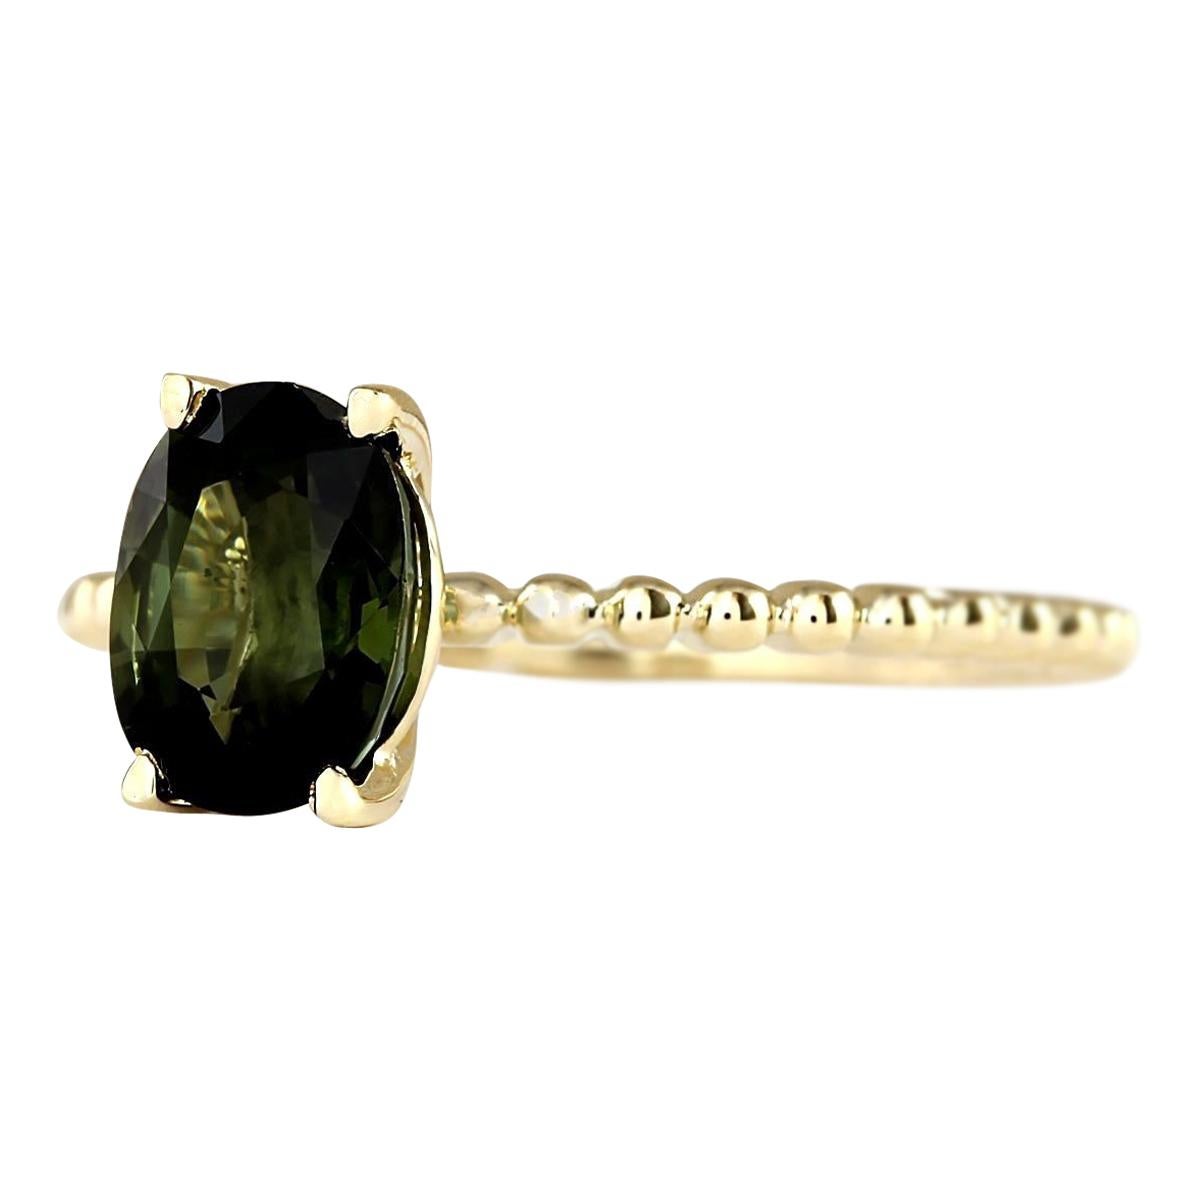 Stamped: 14K Yellow Gold
Total Ring Weight: 2.0 Grams
Total Natural Tourmaline Weight is 1.62 Carat
Color: Green
Face Measures: 8.00x6.00 mm
Sku: [703270W]